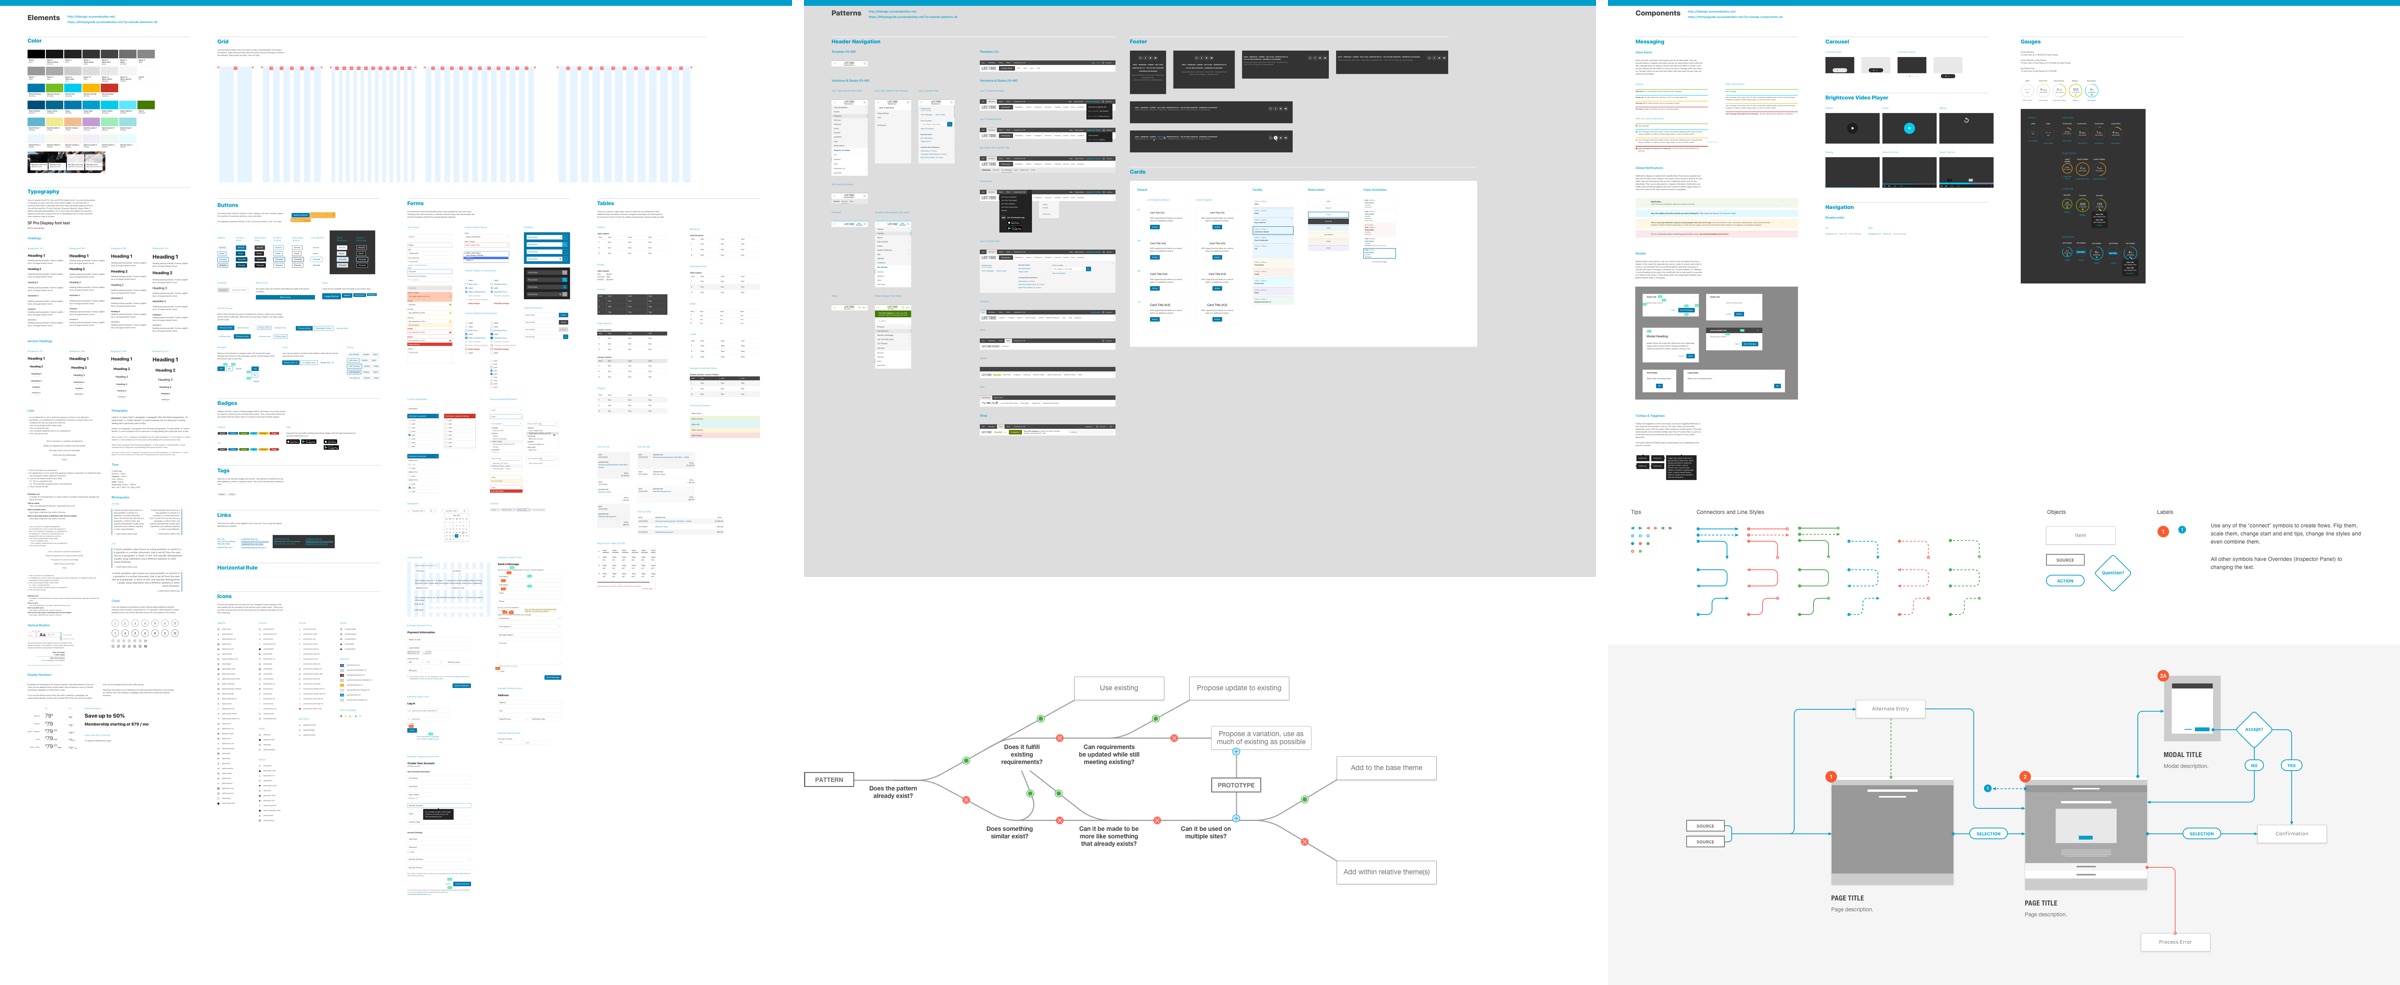 Core Design System User Interface Elements